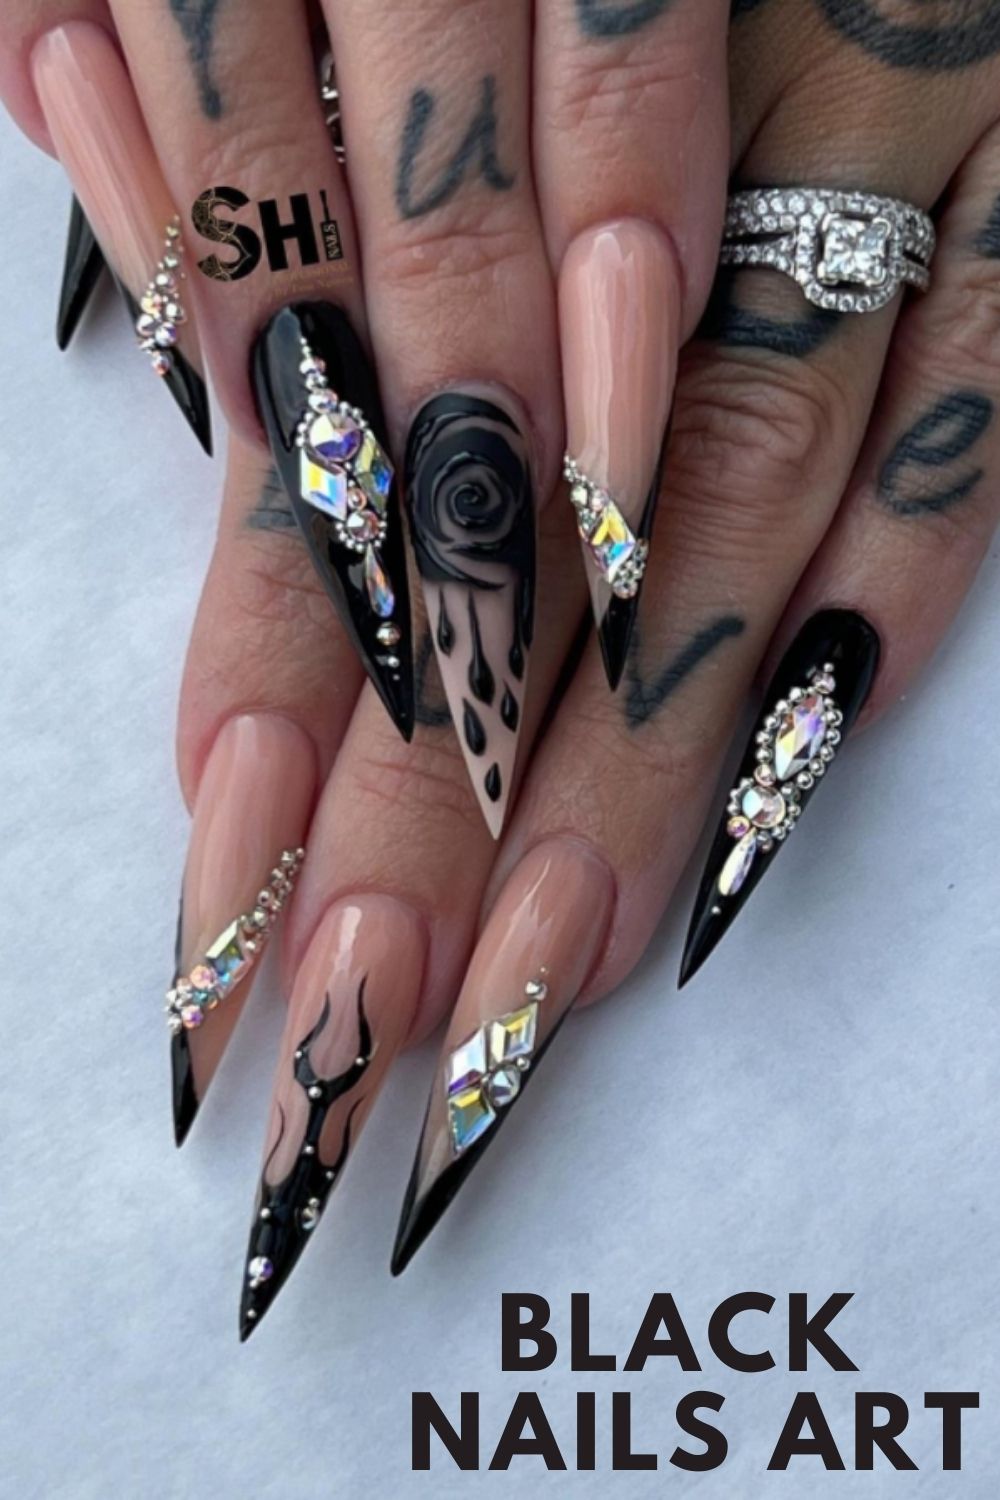 Stiletto nails art with black rose